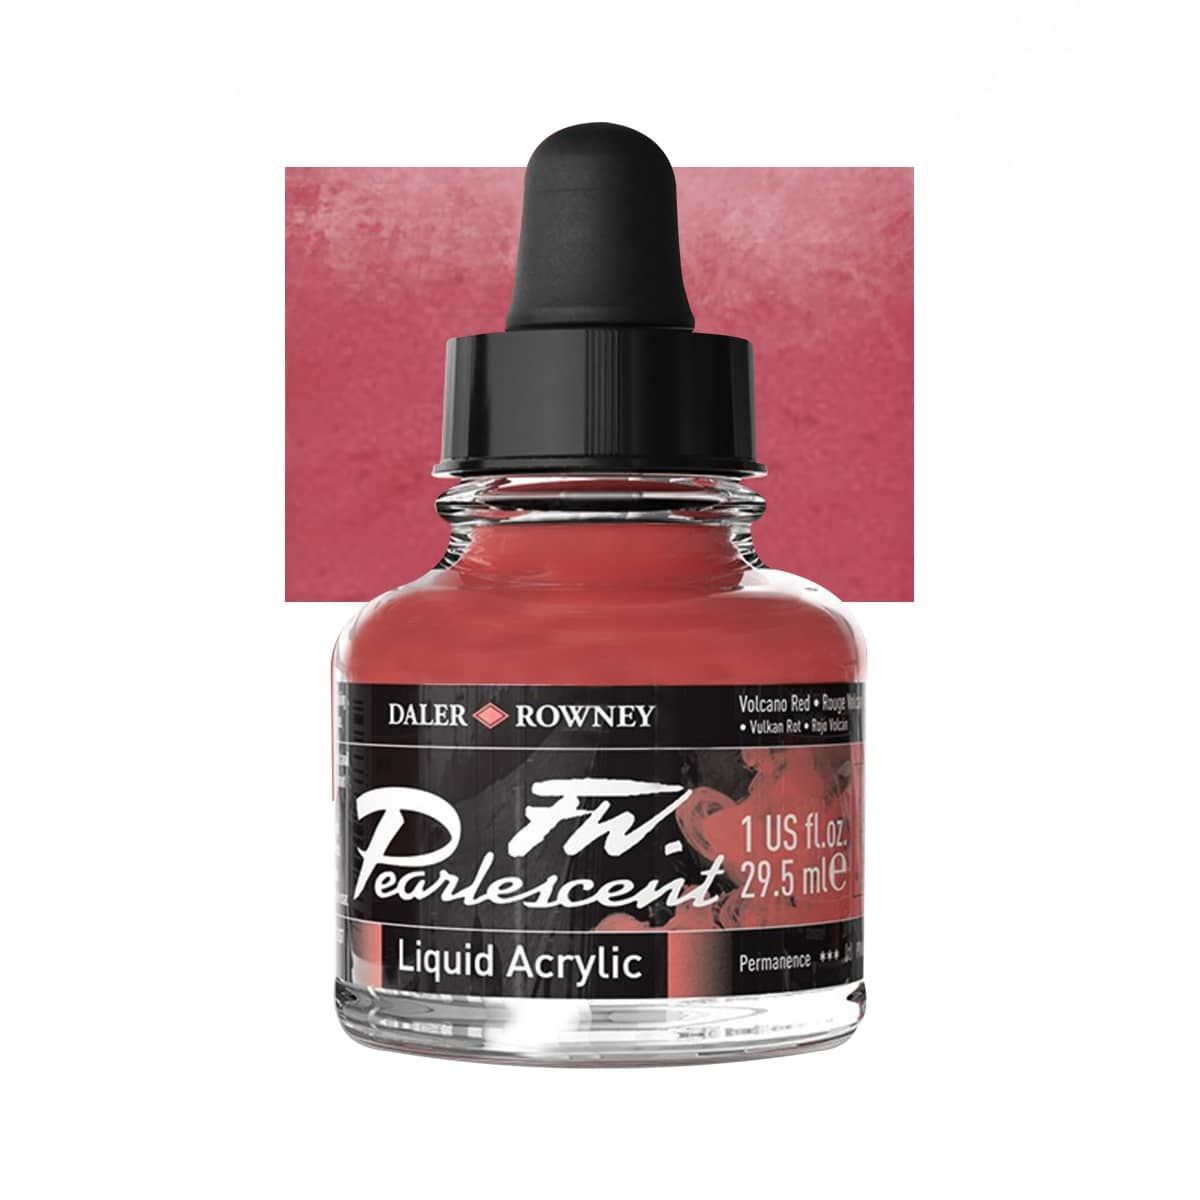 Daler-Rowney F.W. Pearlescent Acrylic Ink 1 oz Bottle - Volcano Red